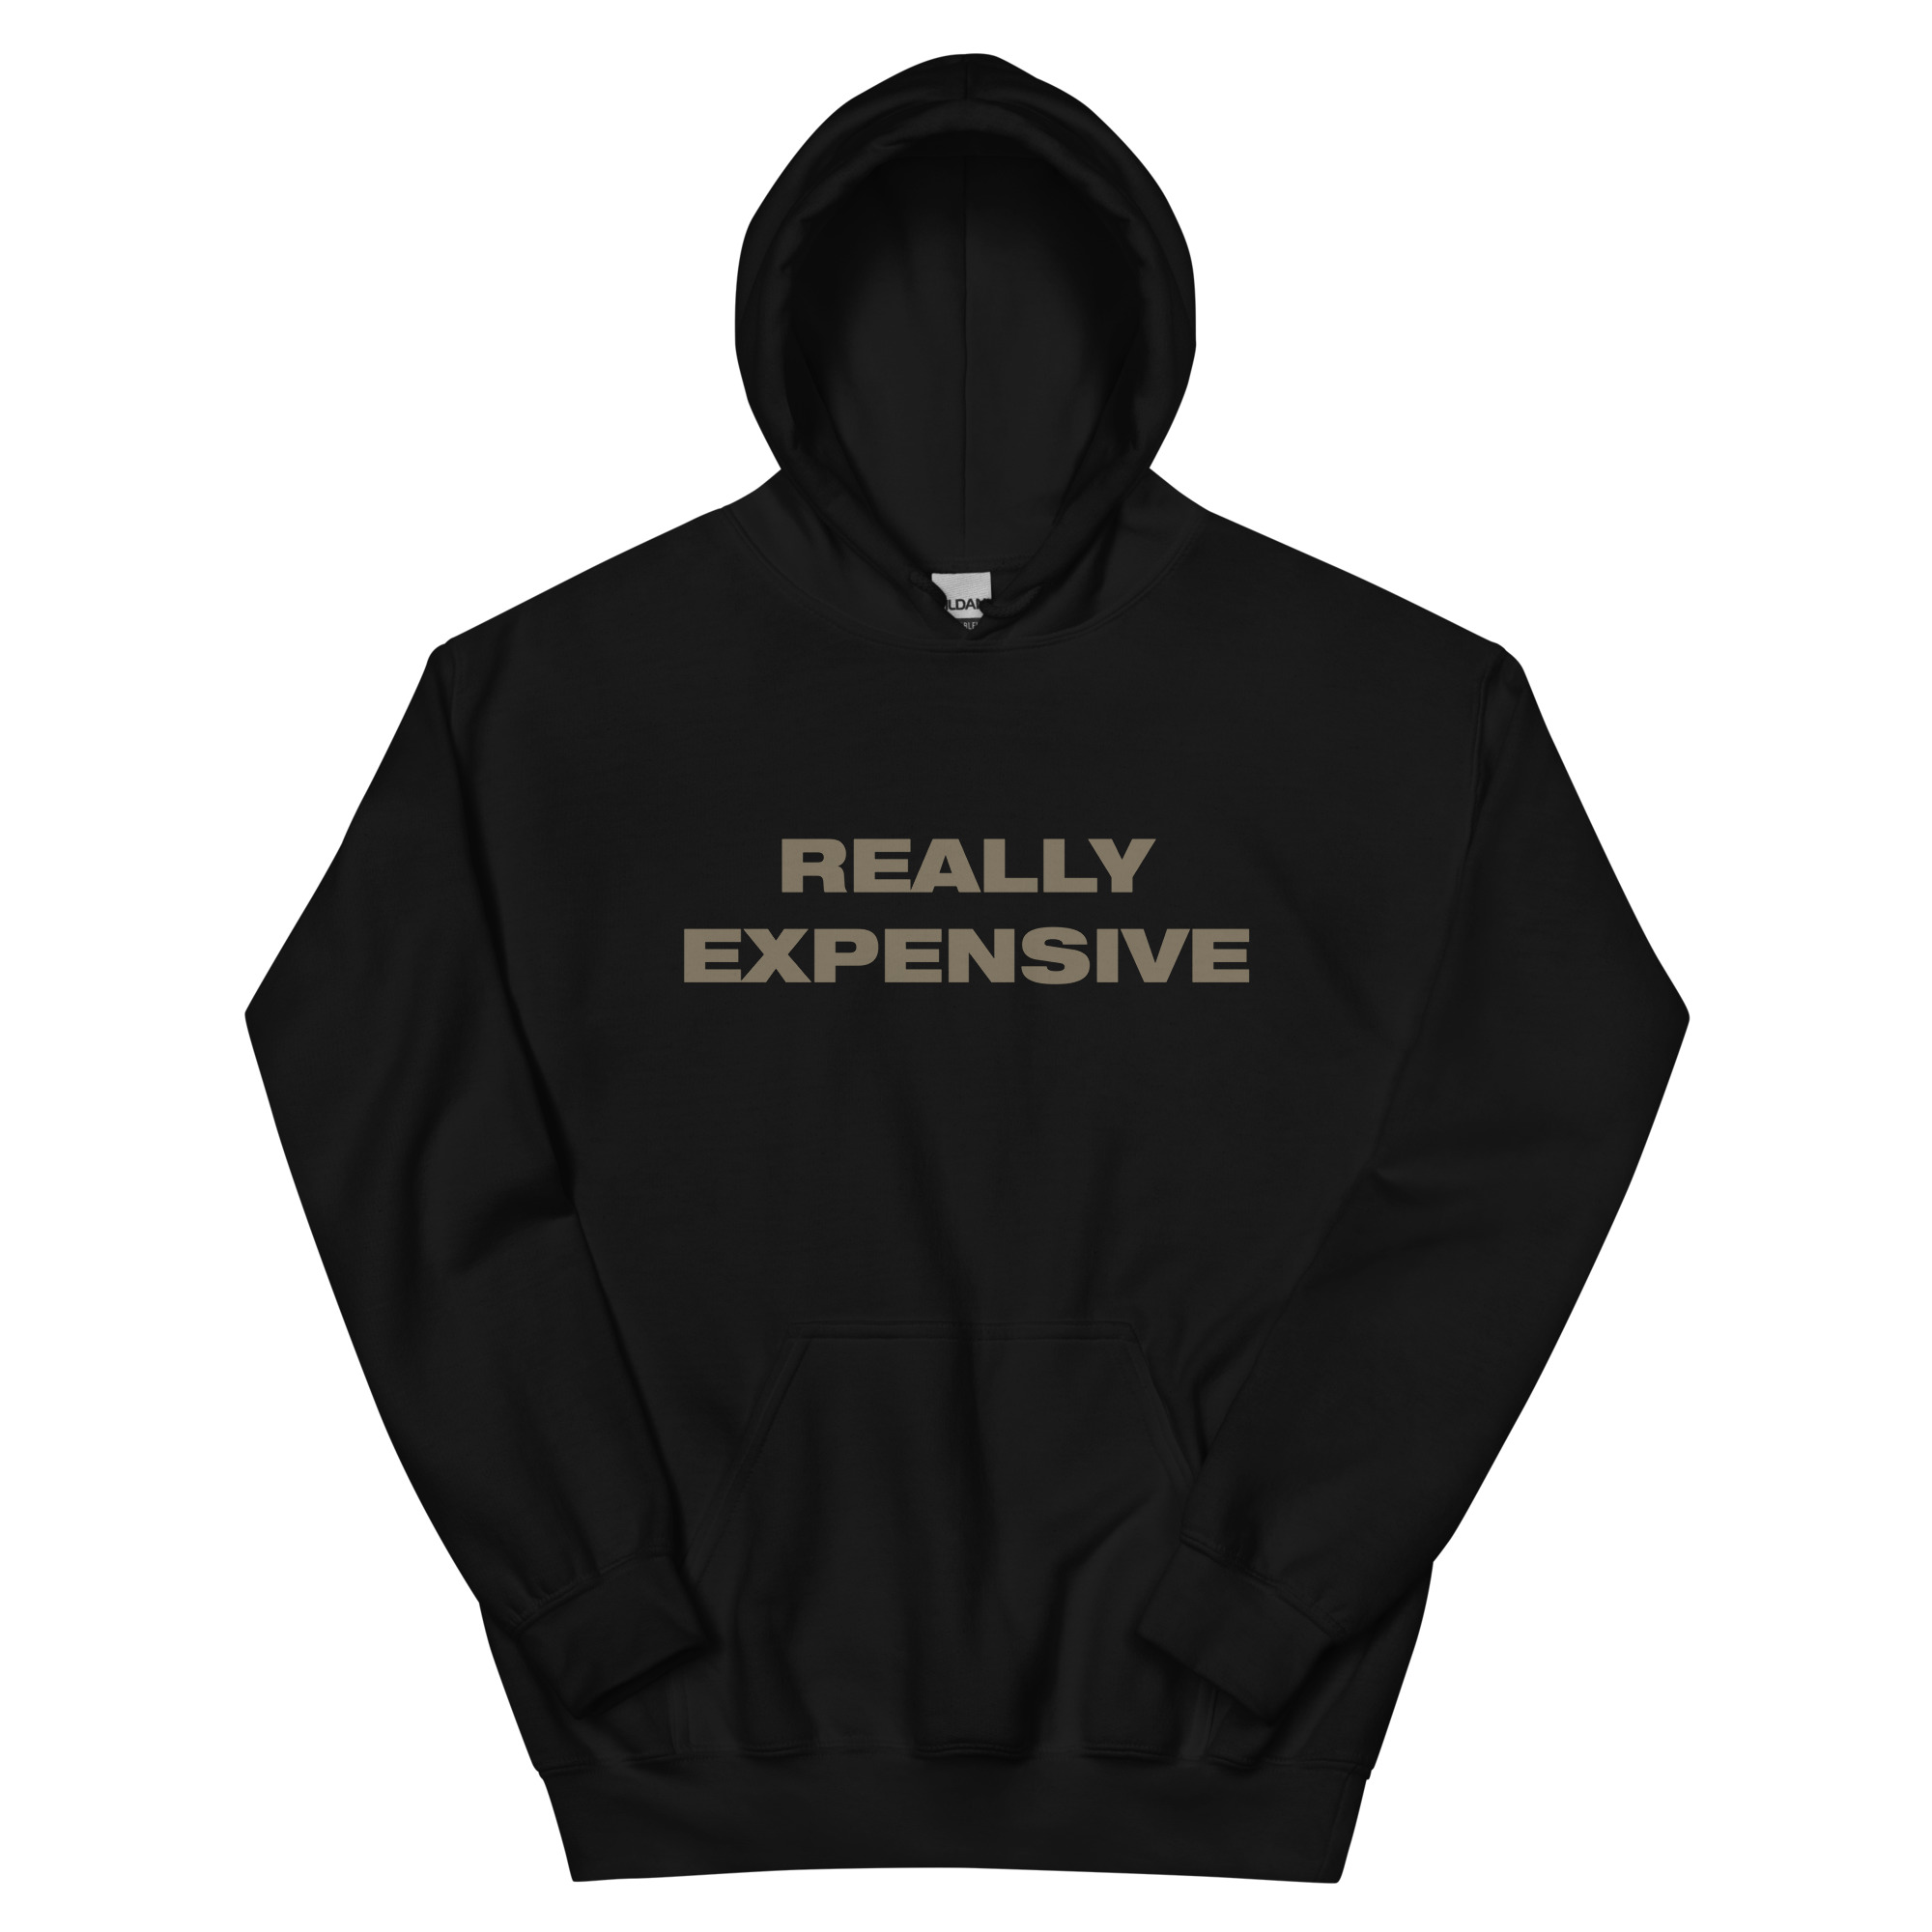 Featured image for “Really Expensive - Unisex Gildan Hoodie”